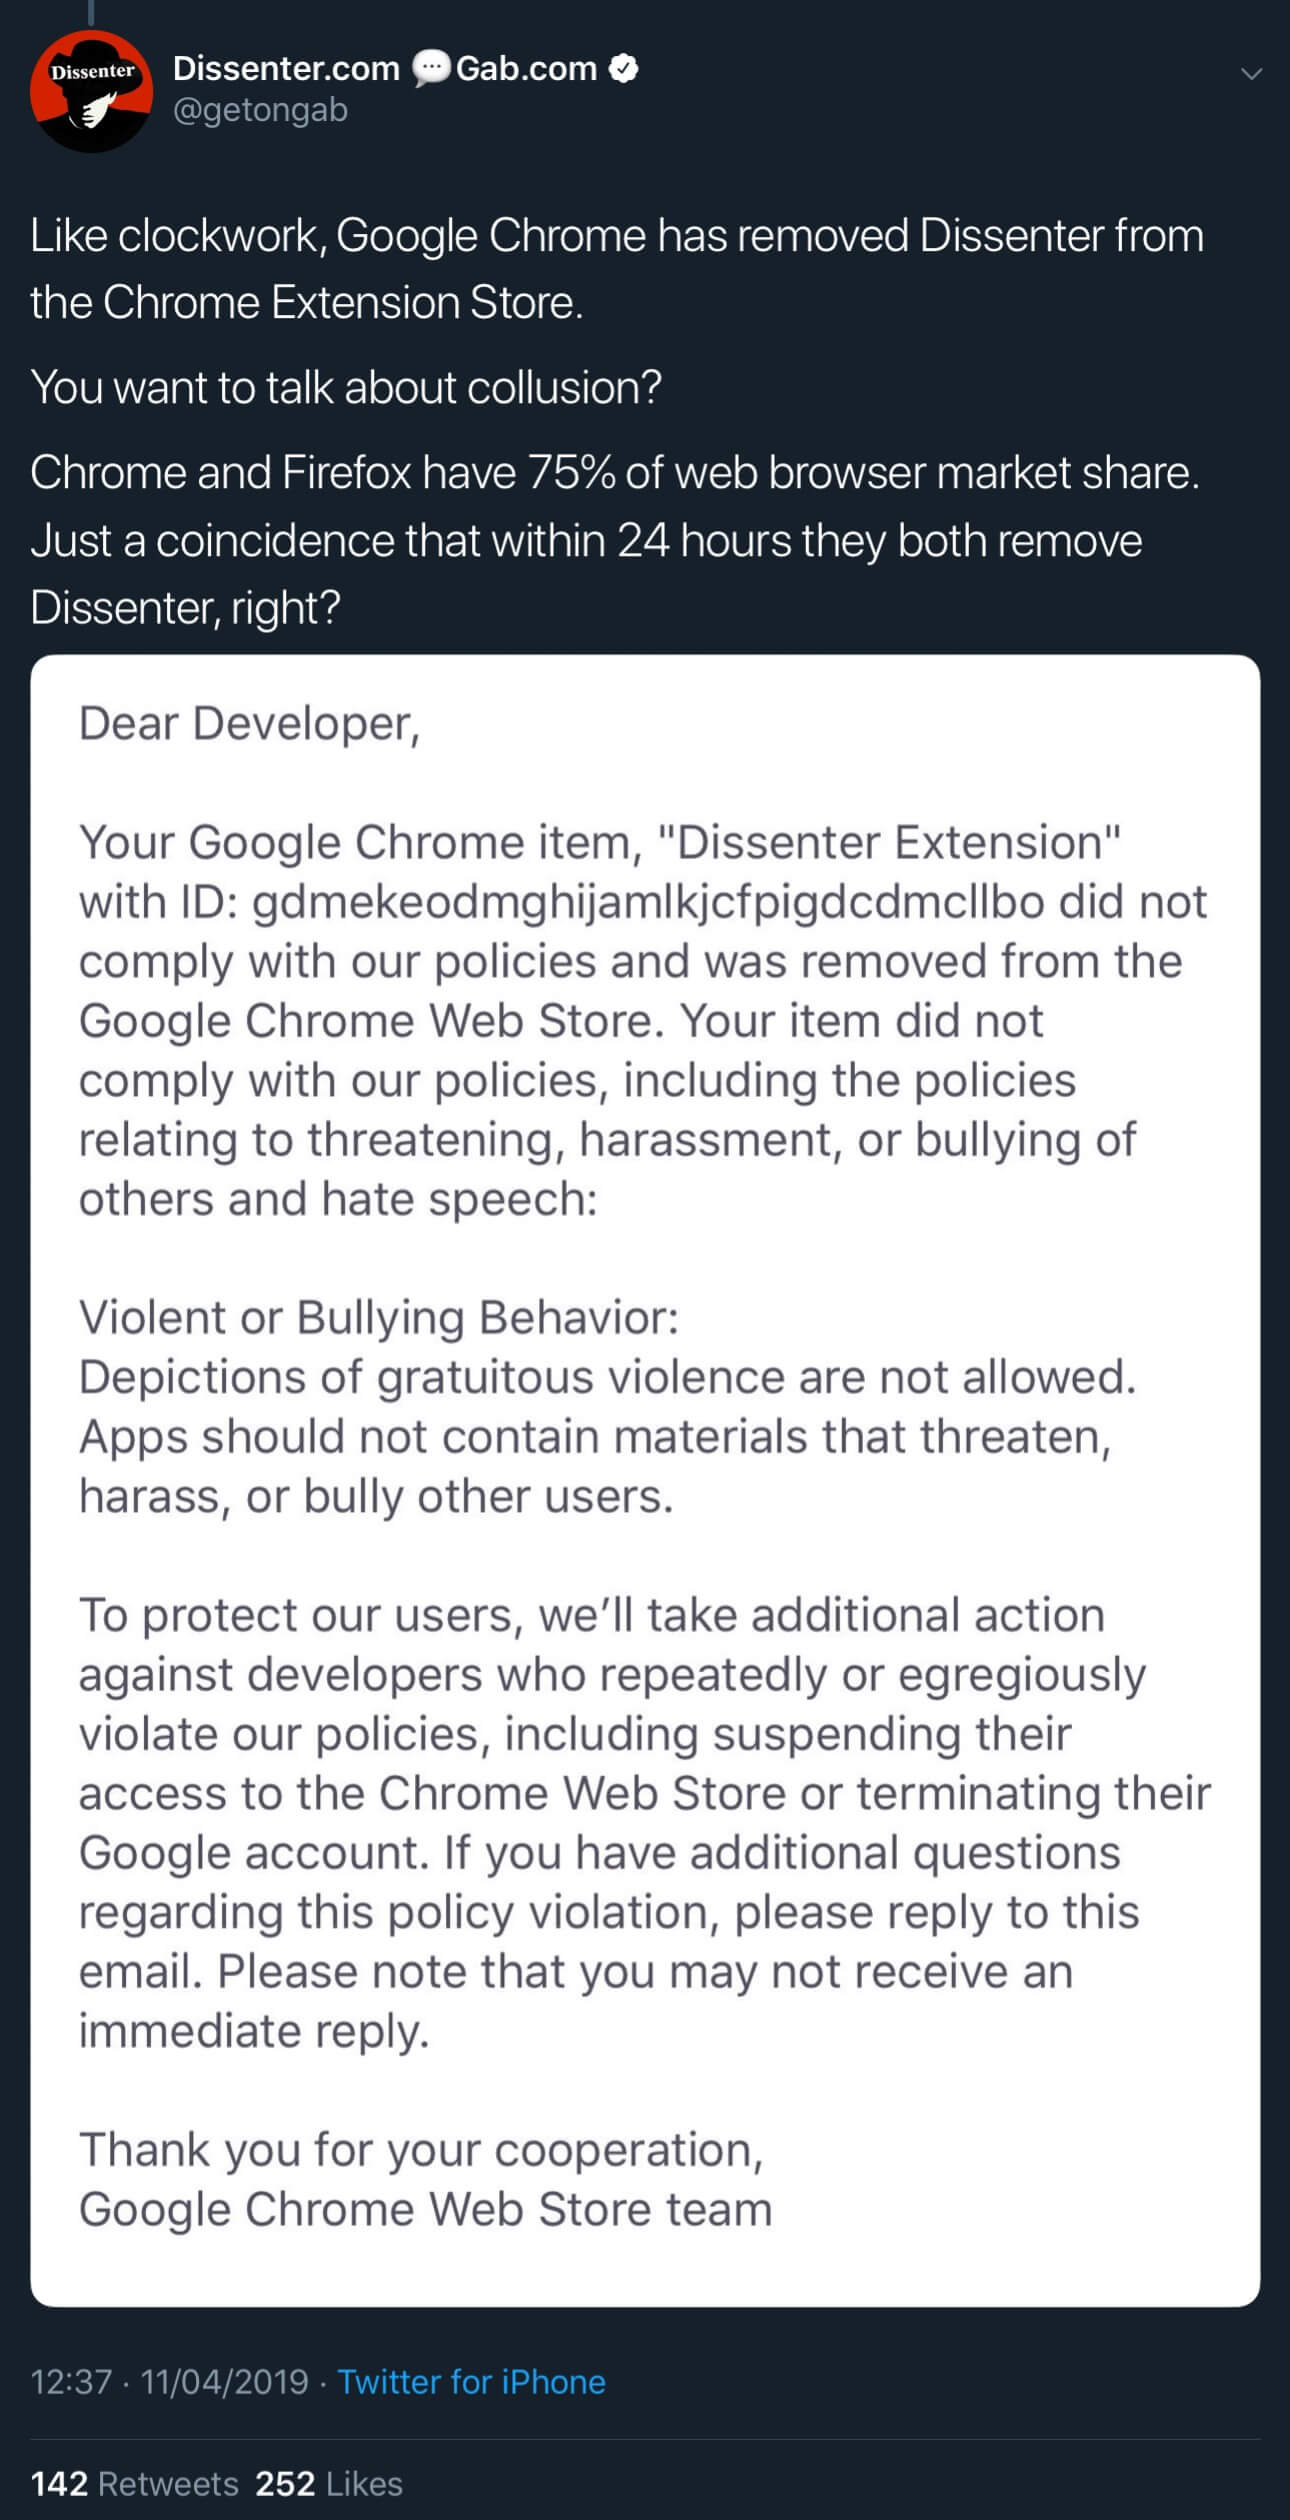 Google’s email to Dissenter saying the extension has been removed for violating its policies related to threatening, harassment, bullying, and hate speech.